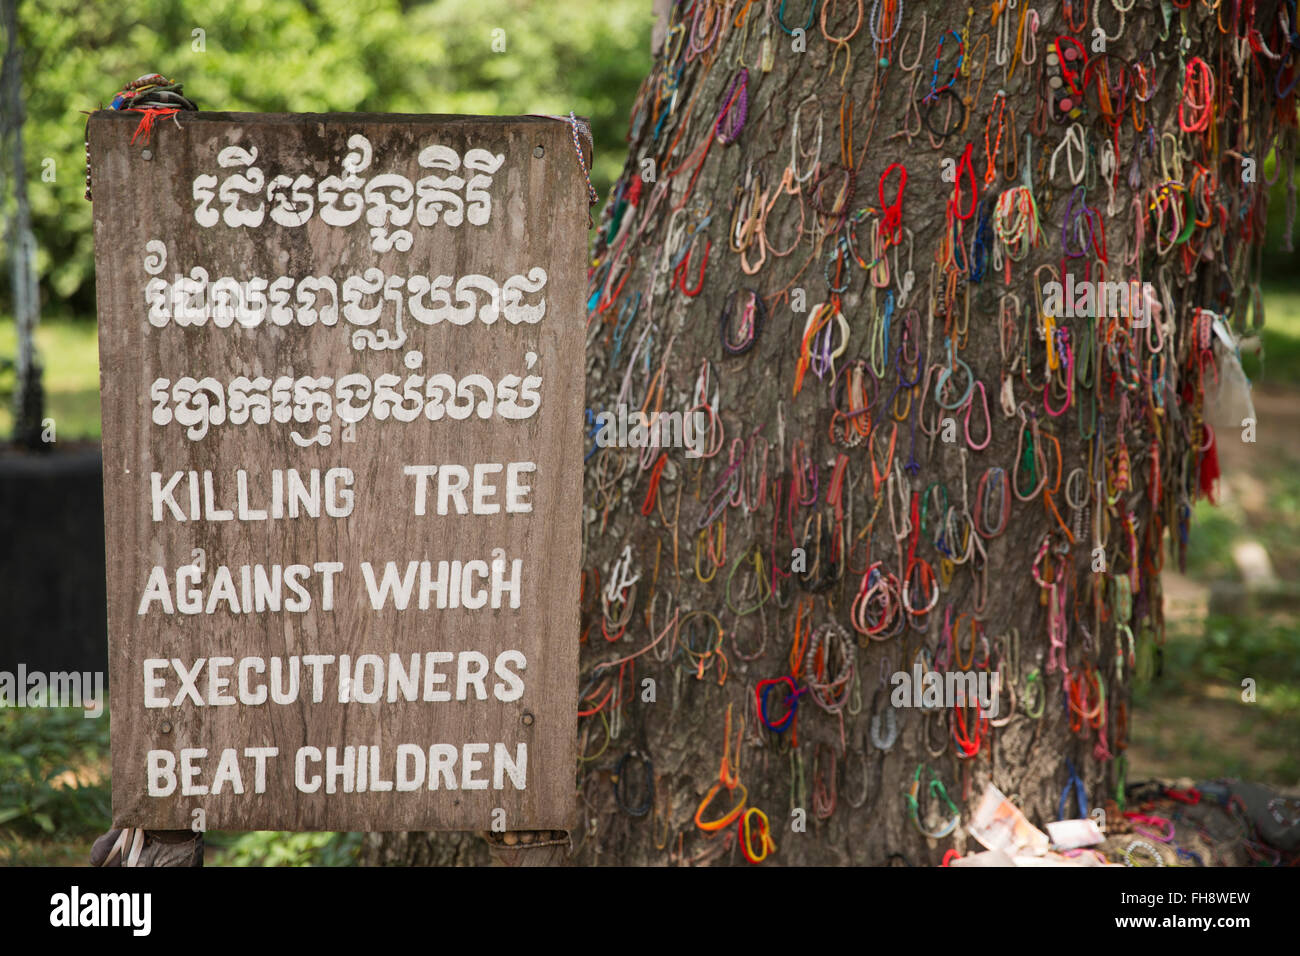 Tree used for smashing heads of infants in front of mothers at Killing Fields memorial in in Phnom Penh, Cambodia Stock Photo